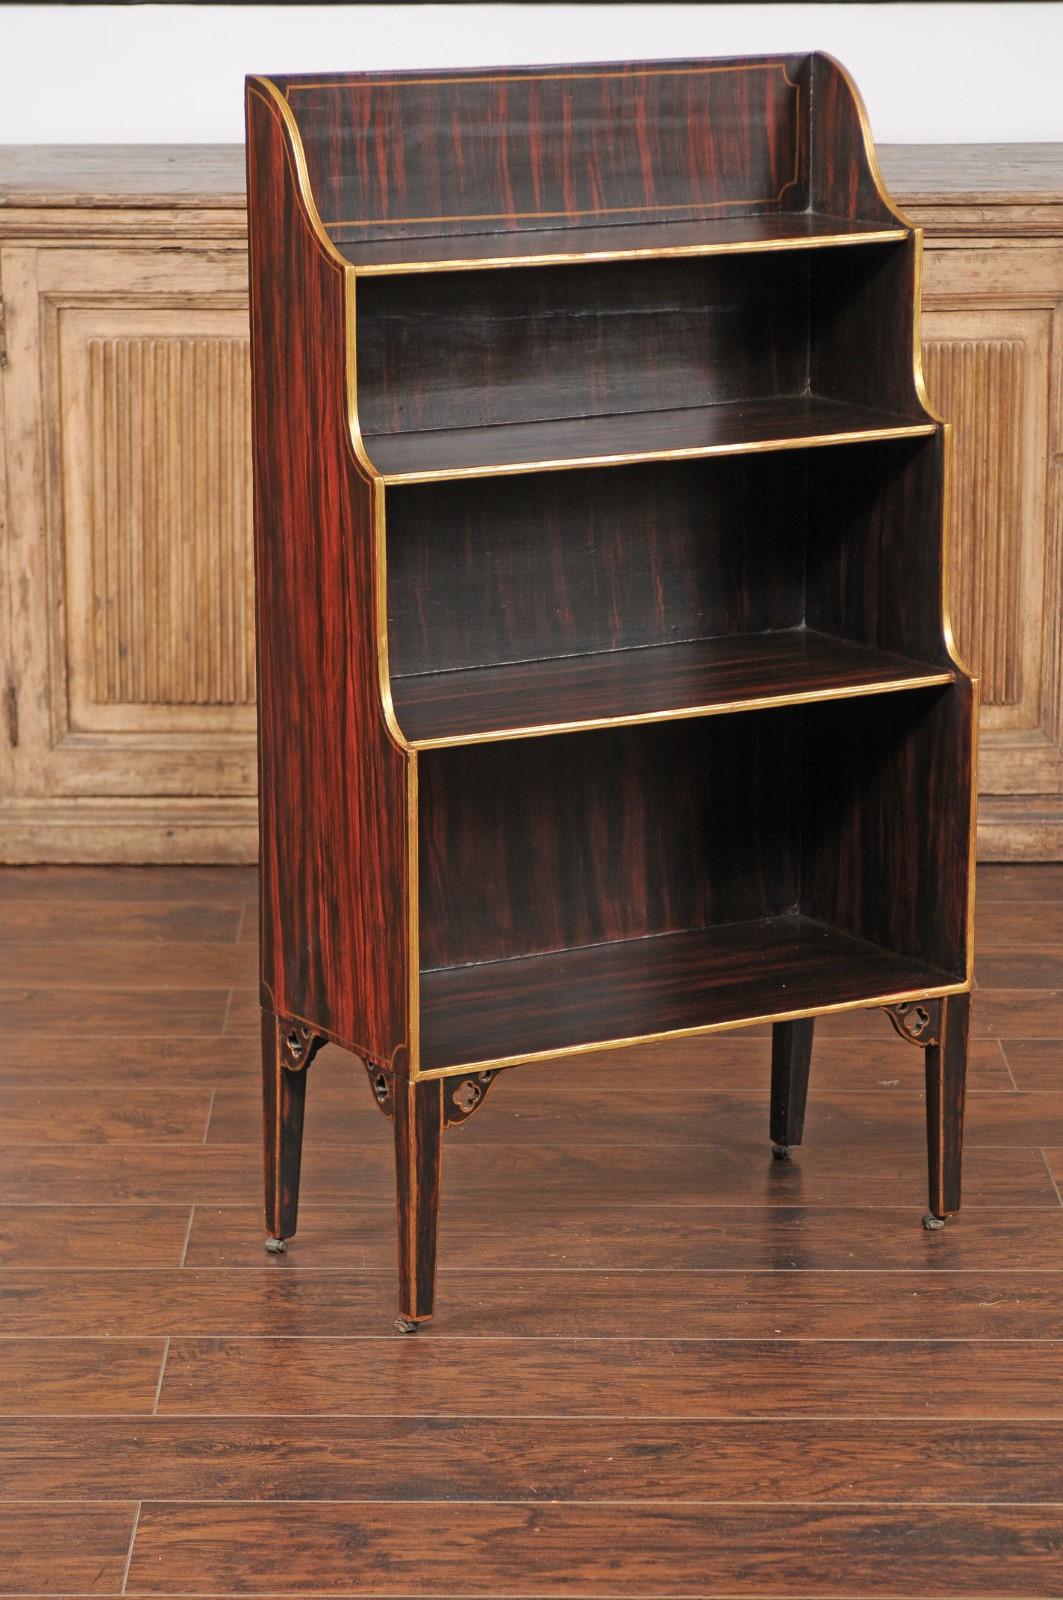 An English faux-painted waterfall bookcase from the mid-19th century, with gilded accents and tapered legs. This English faux-painted waterfall bookcase from the mid-19th century exudes a charming blend of functionality and decorative flair. Crafted